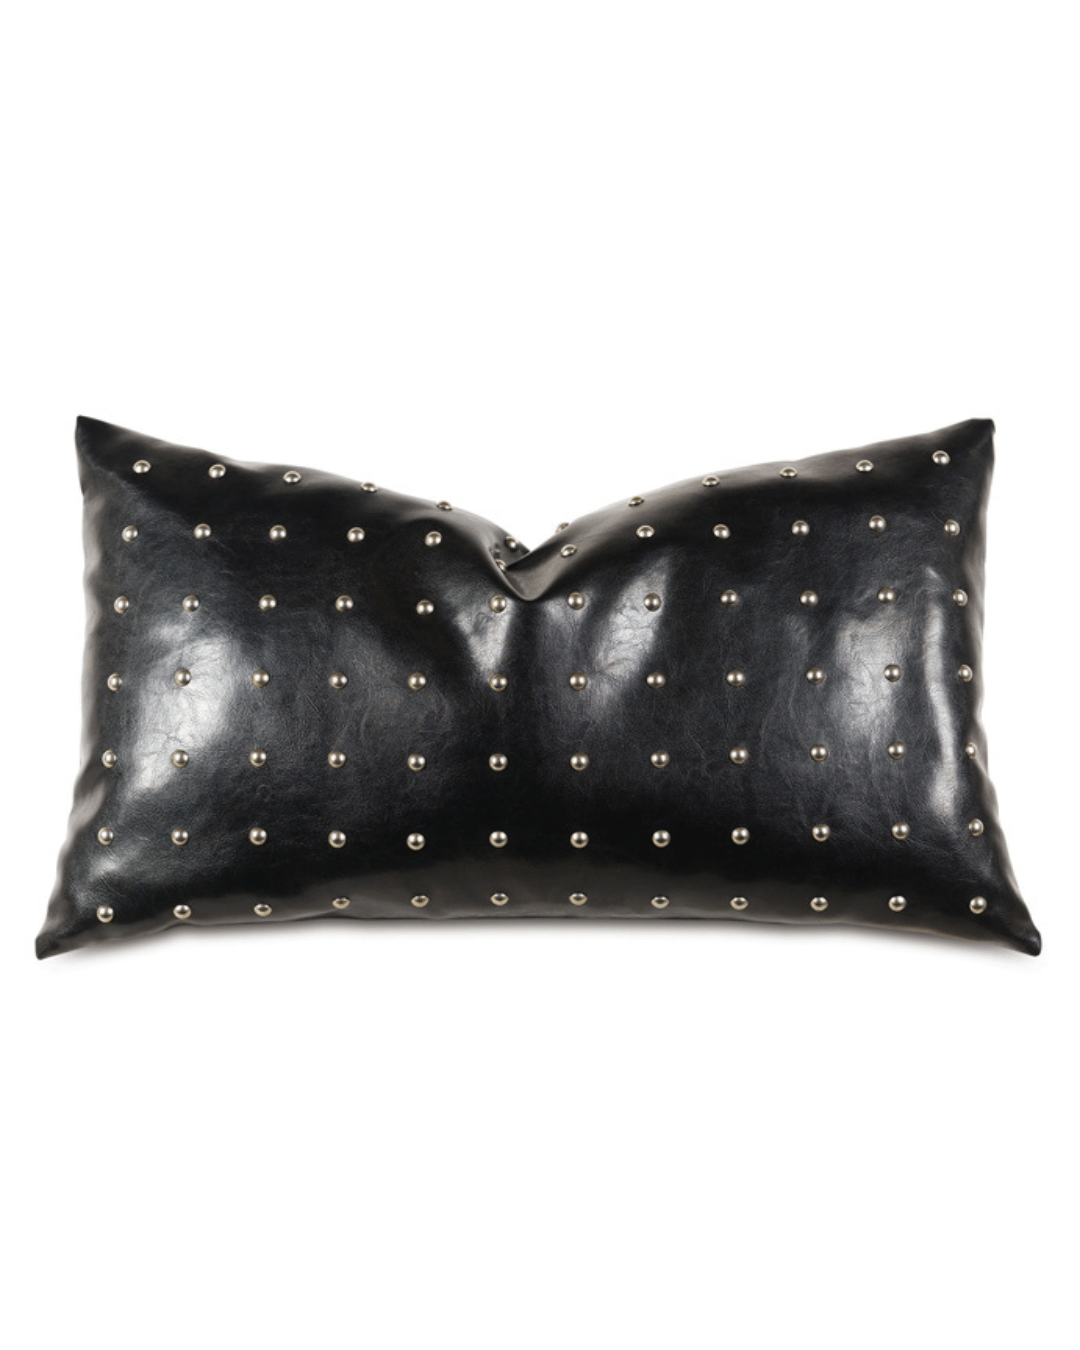 A rectangular black faux leather pillow adorned with evenly spaced nailhead accents. The shiny surface and reflective metal studs create a sleek and modern look suitable for stylish home decor or as an accent pillow for furniture, the Eastern Accents ONYX W/NAILHEADS 15x26.